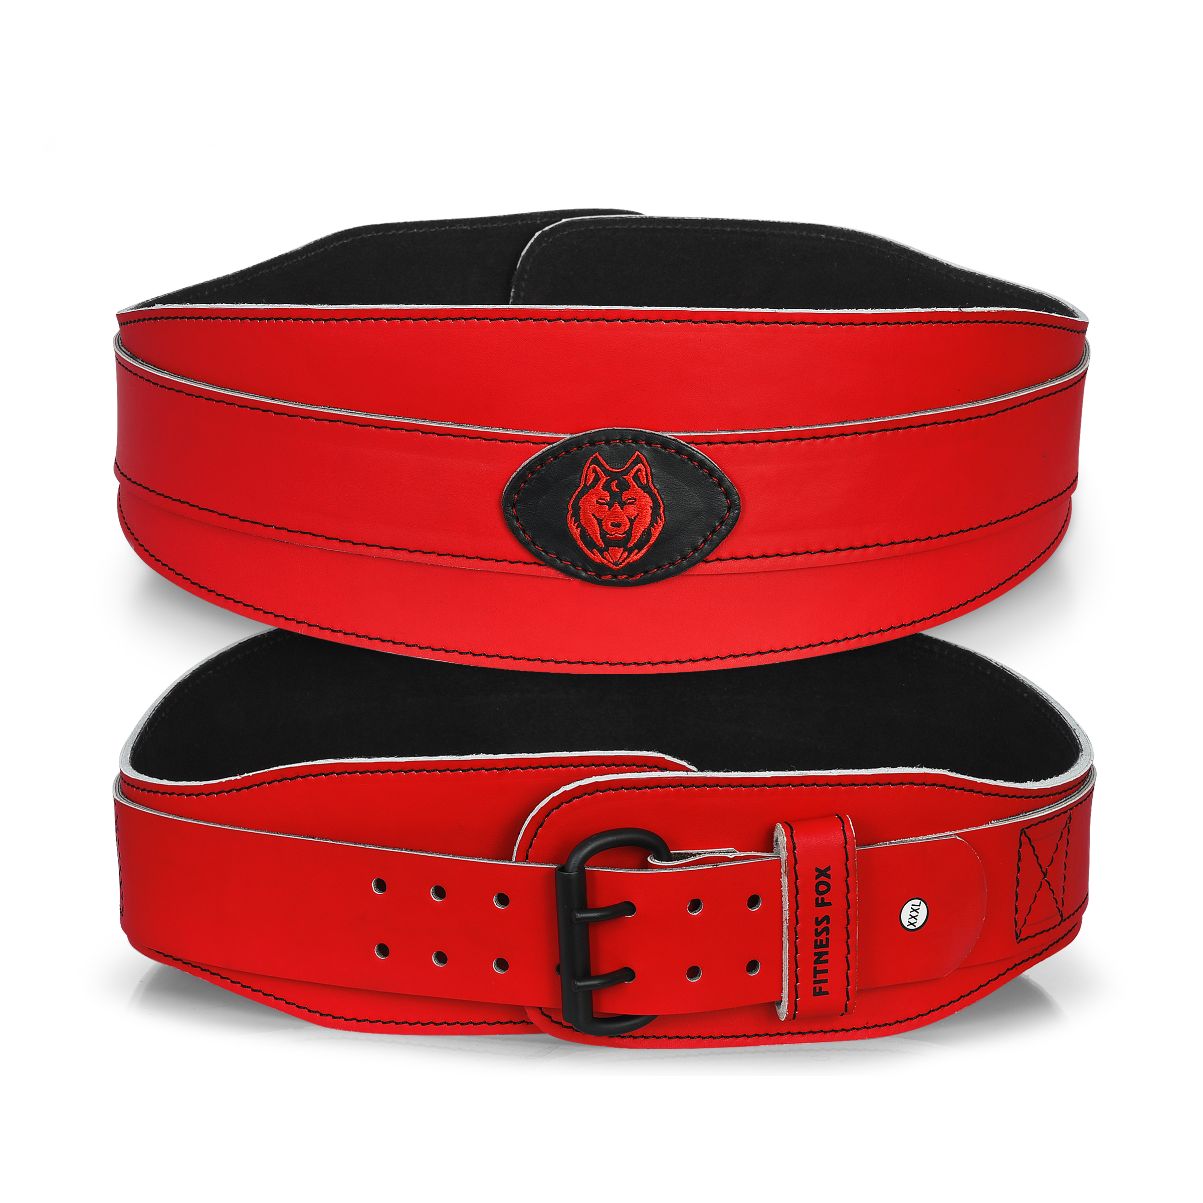 leather Contoured Weightlifting Belt